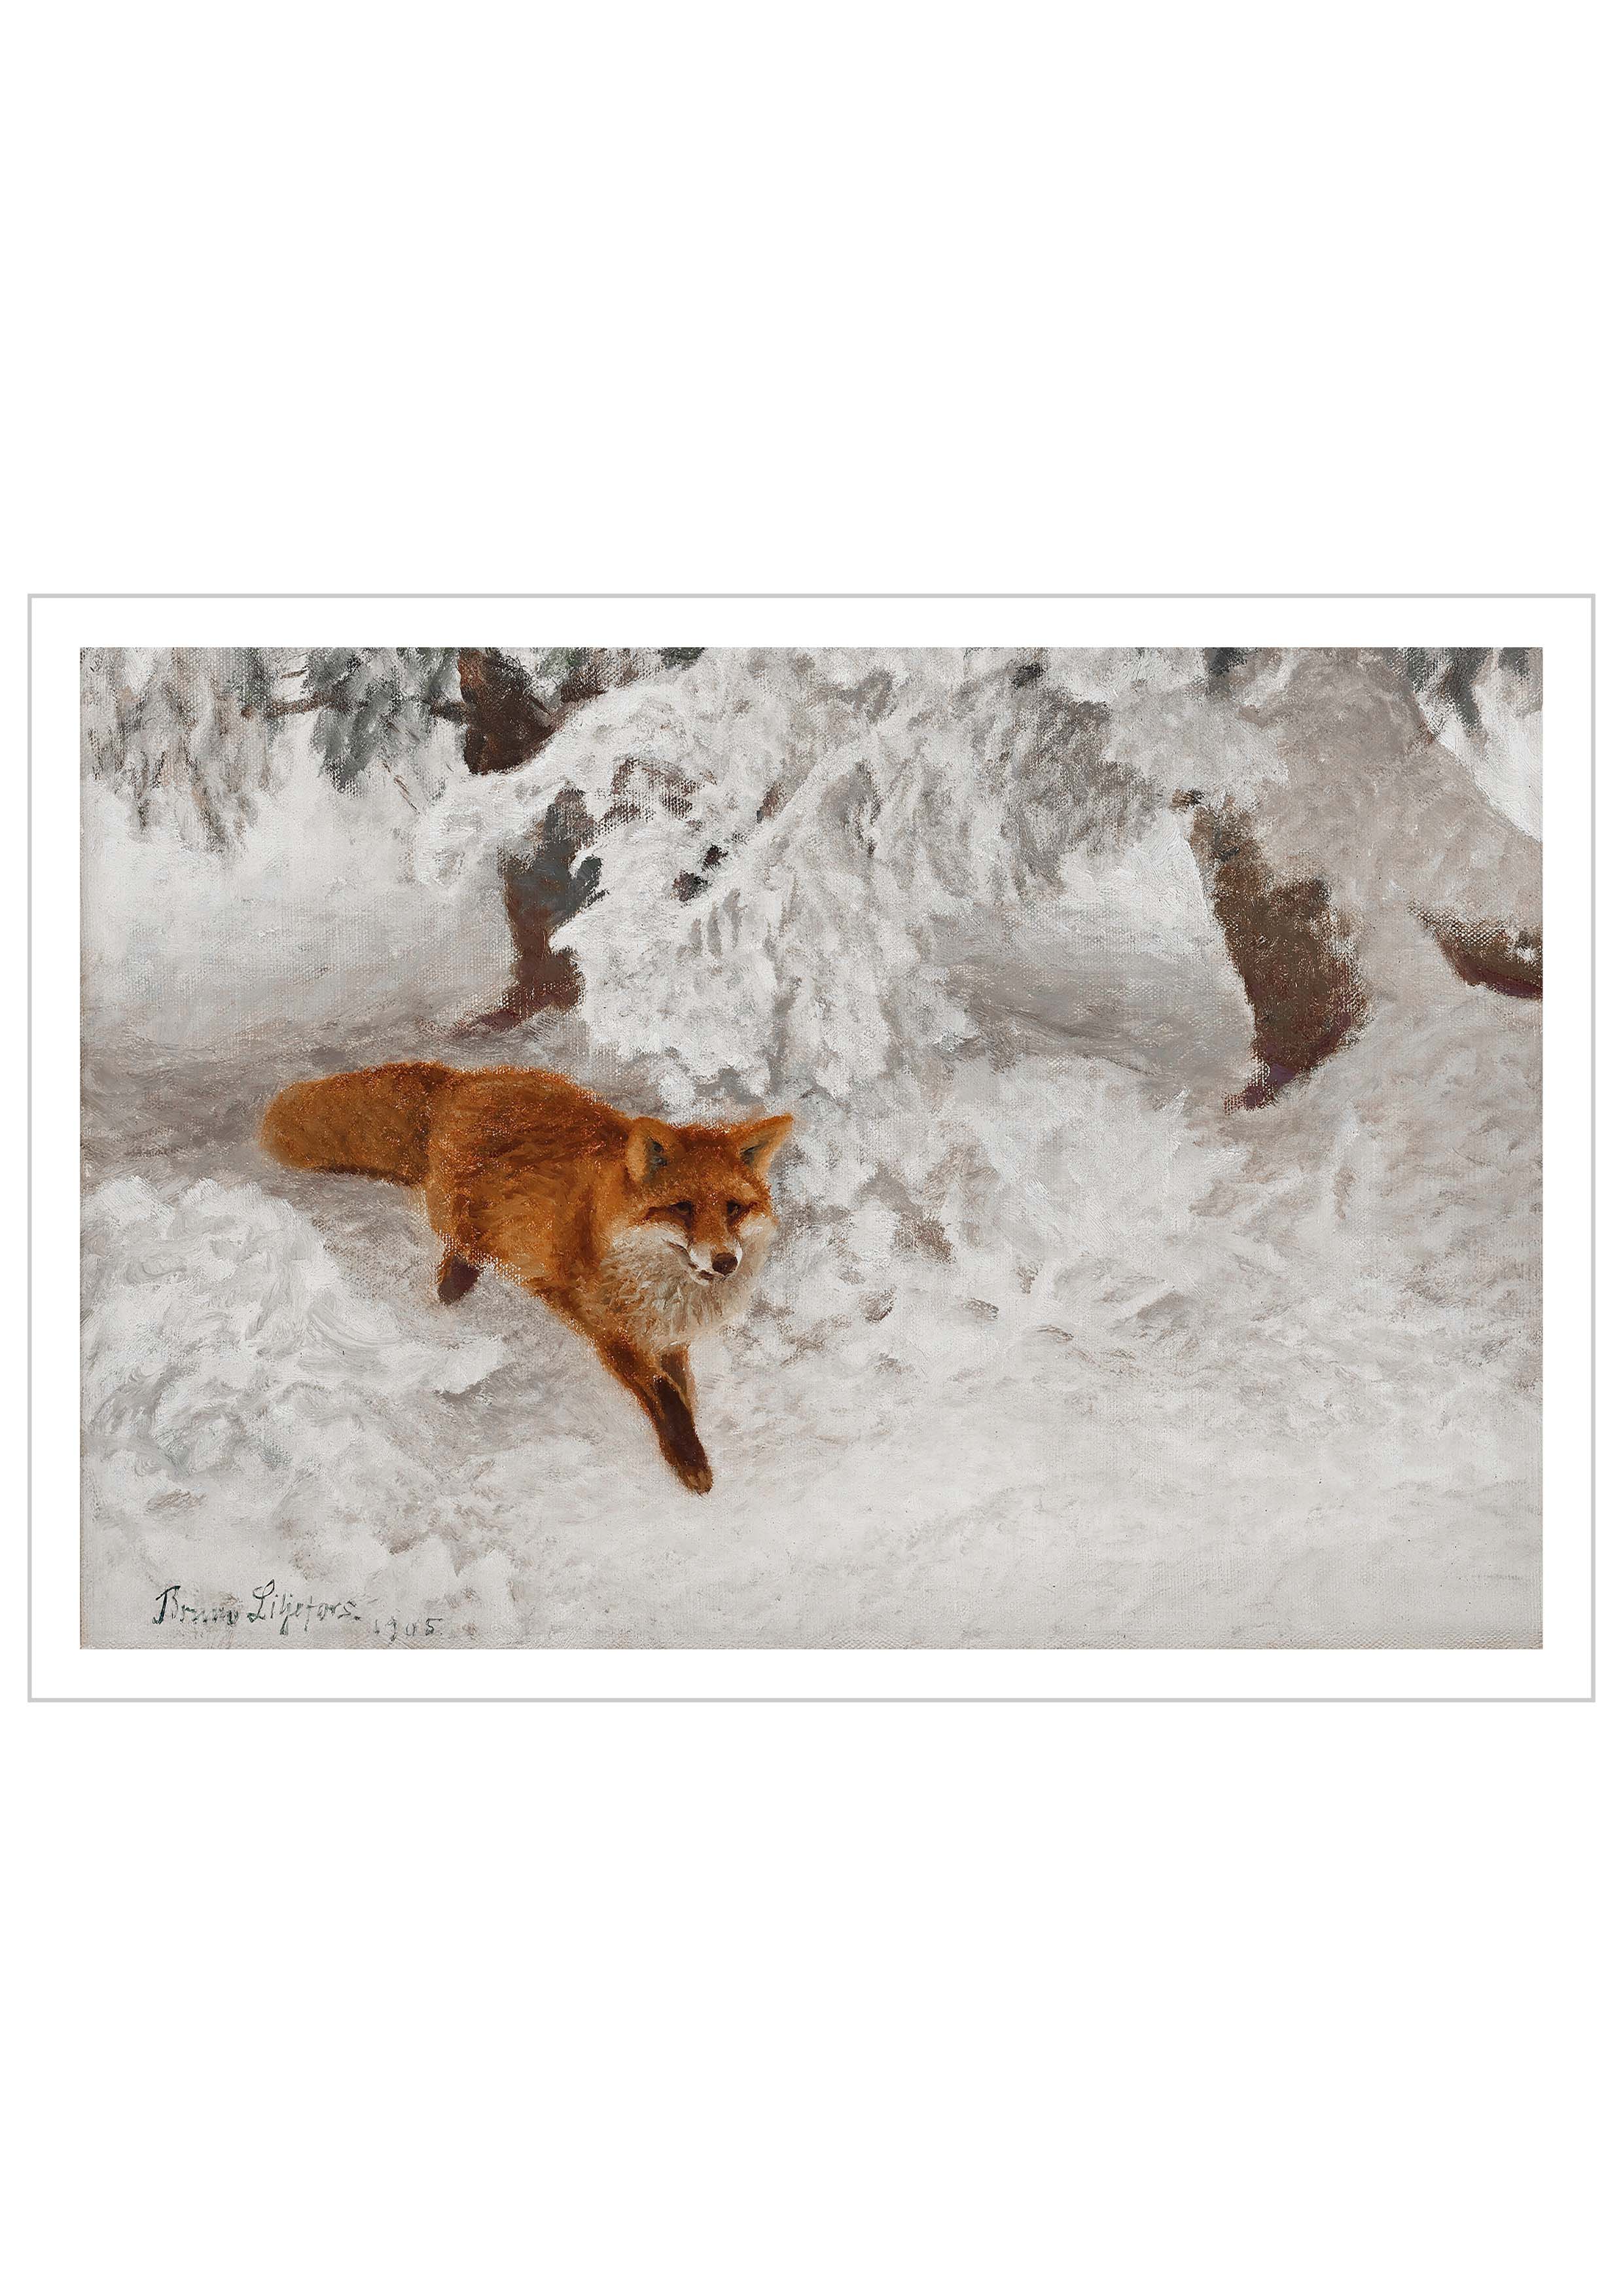 A vintage painting of "Red Fox" in winter landscape by the Swedish artist Bruno Liljefors. 